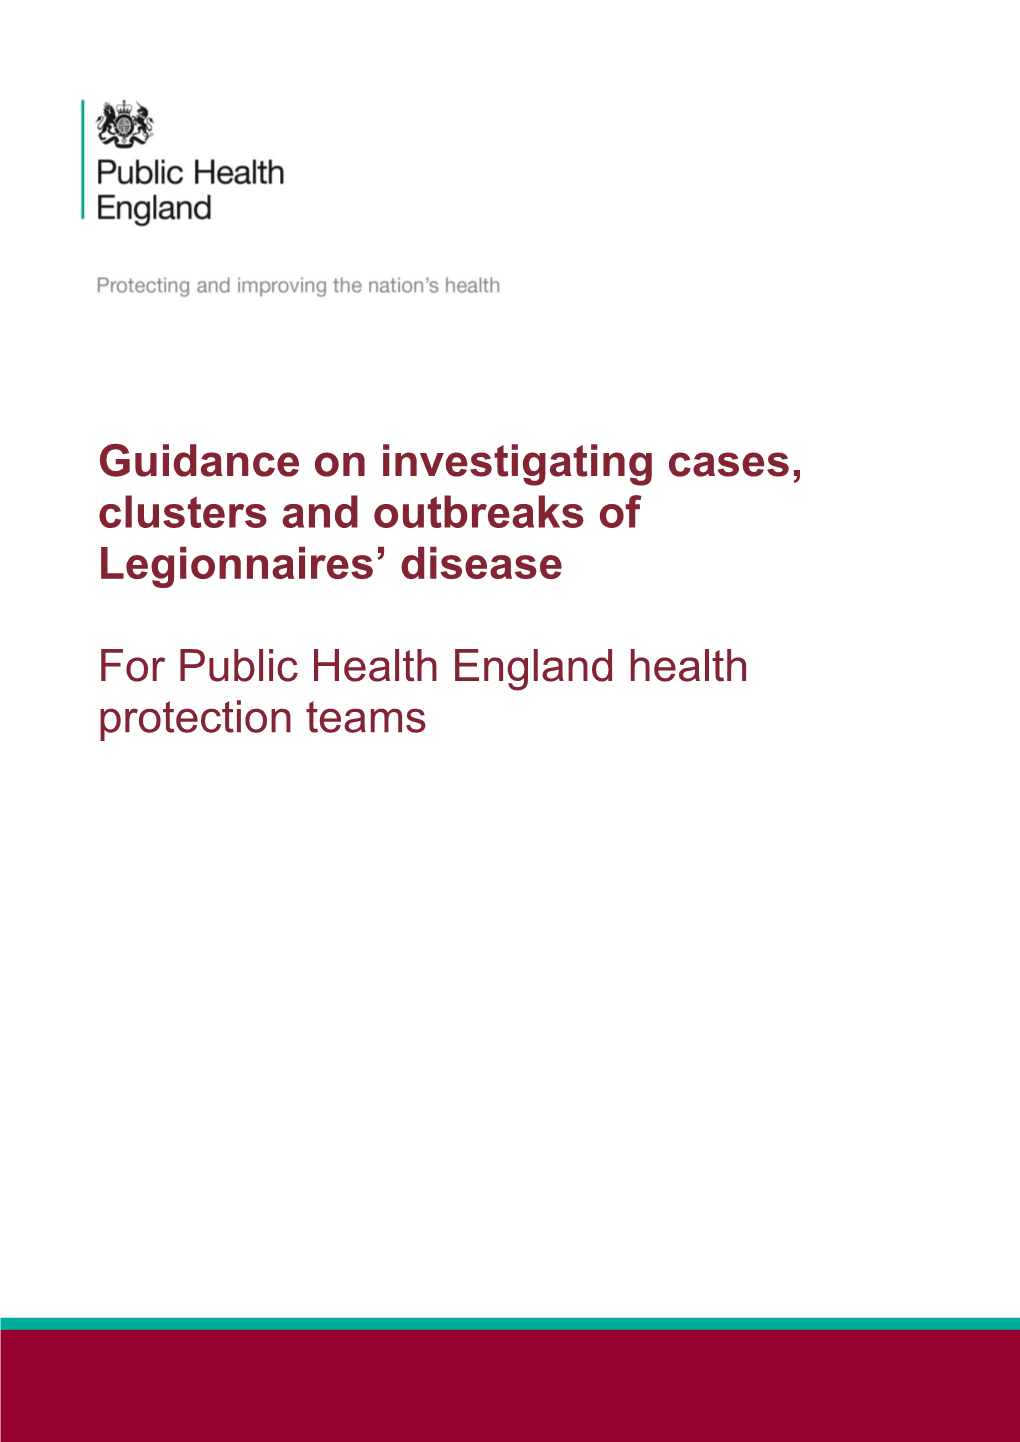 Guidance on Investigating Cases, Clusters and Outbreaks of Legionnaires' Disease